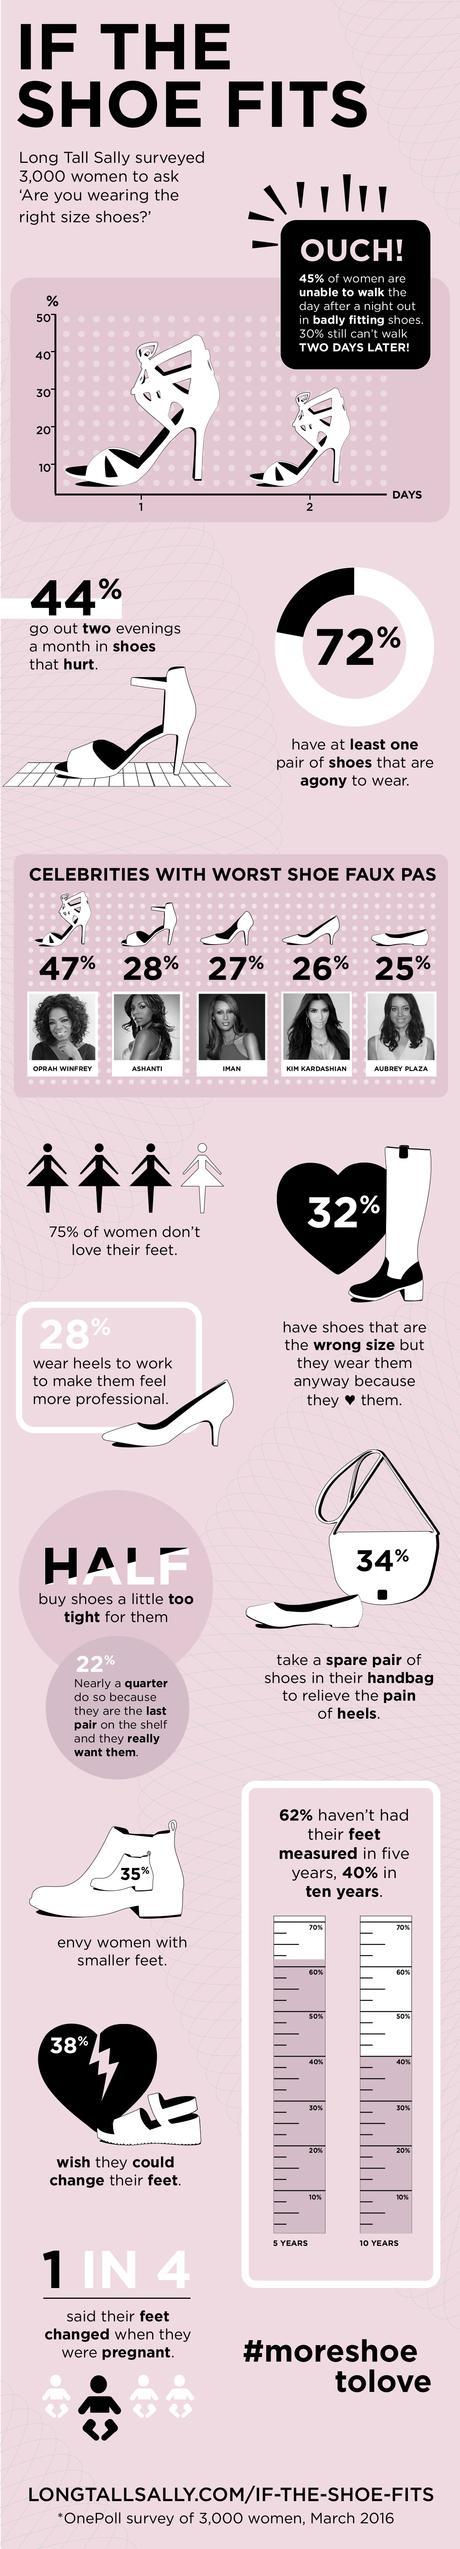 3 in 4 Women Own a Pair of Shoes that Cause ‘Absolute Agony’